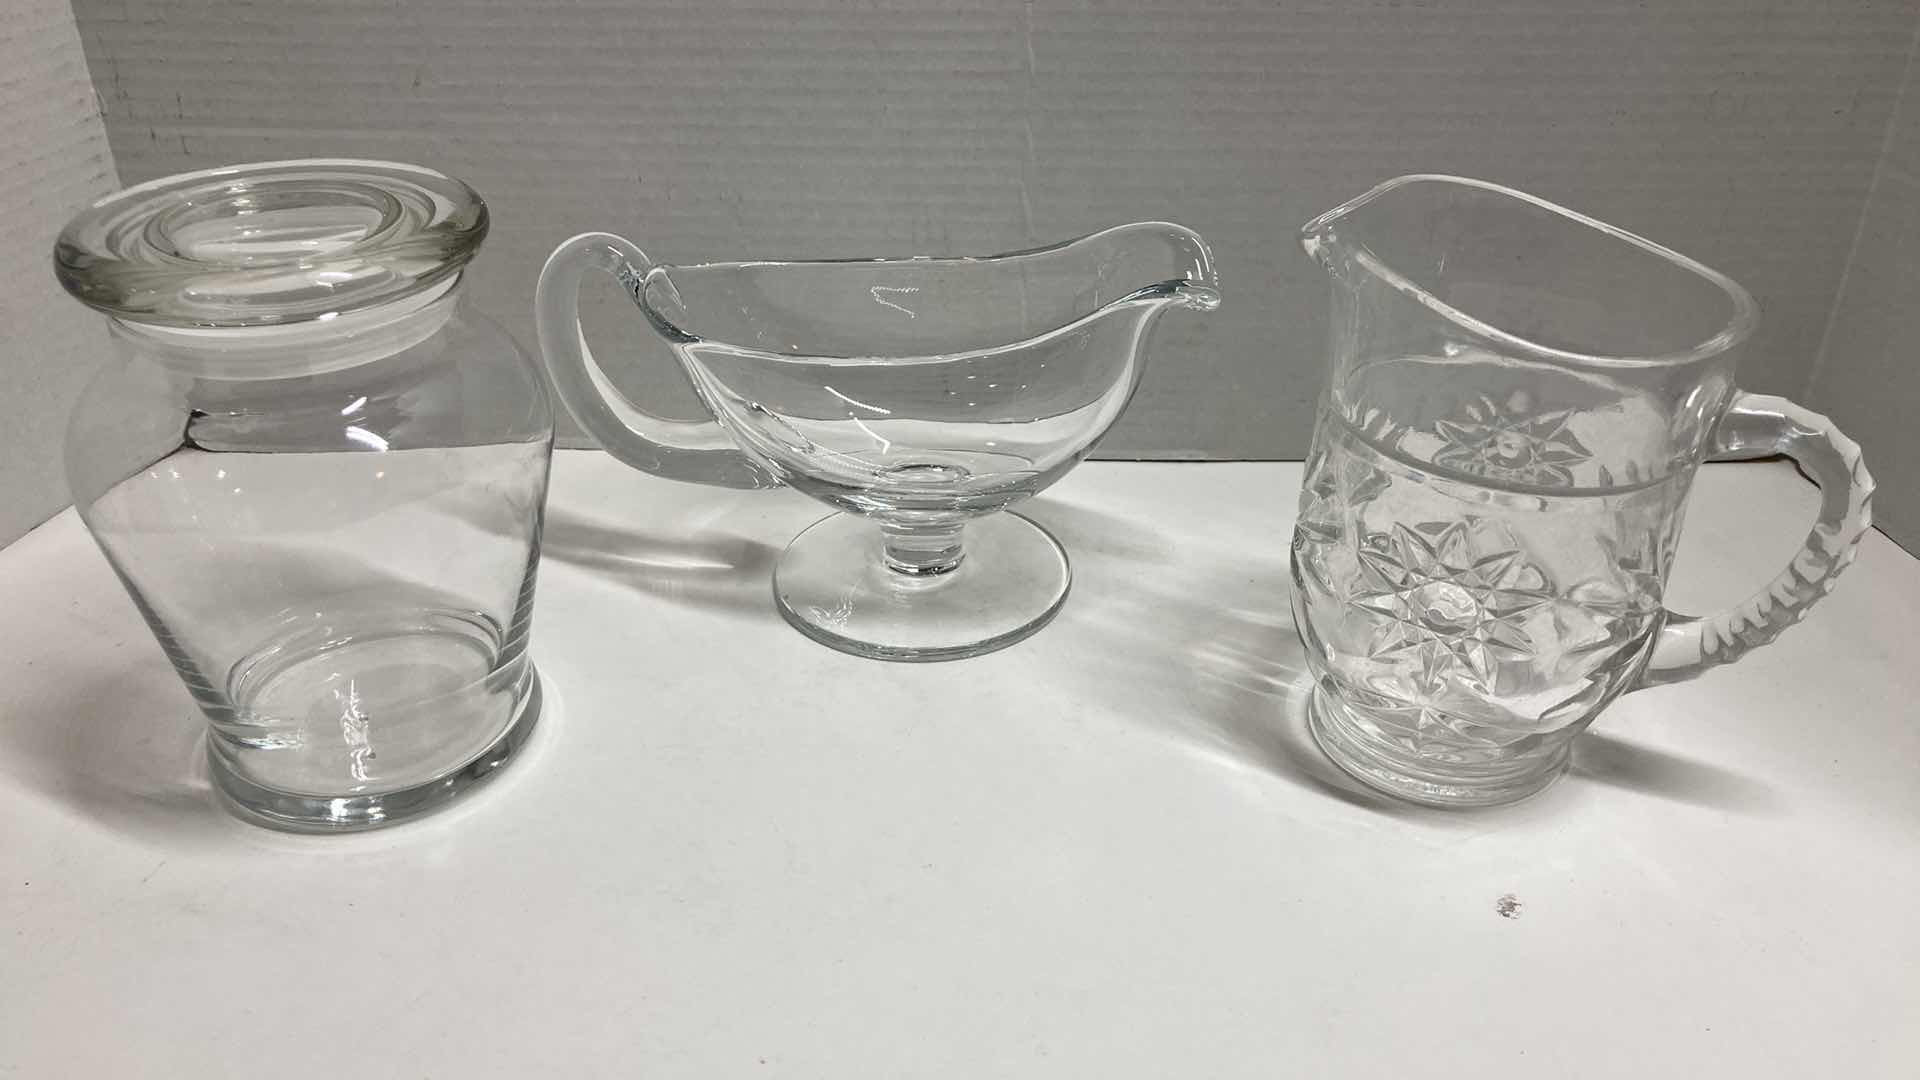 Photo 3 of CLEAR GLASS SERVING DISHES (3) W SALT & PEPPER SHAKERS W CADDY & PLASTIC PEPPERCORN GRINDER